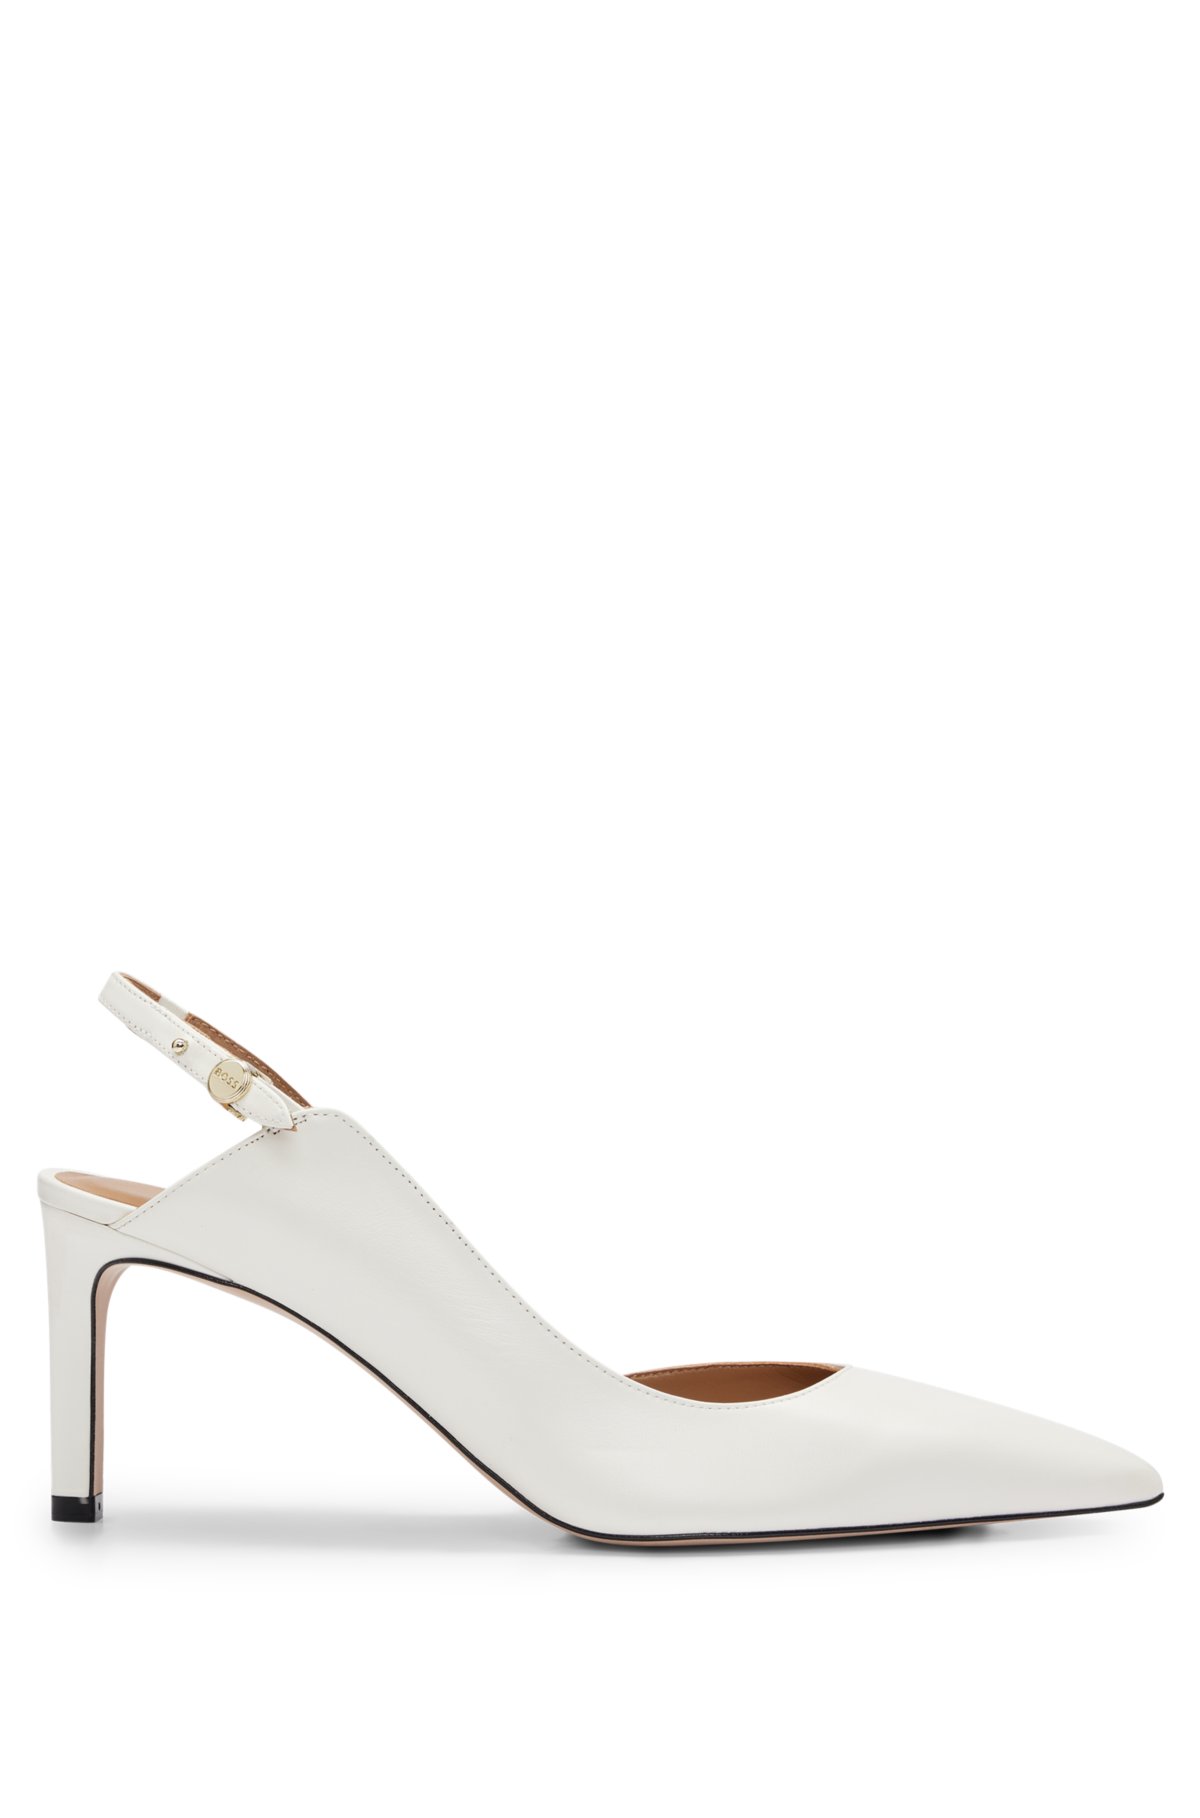 Slingback pumps in nappa leather, White